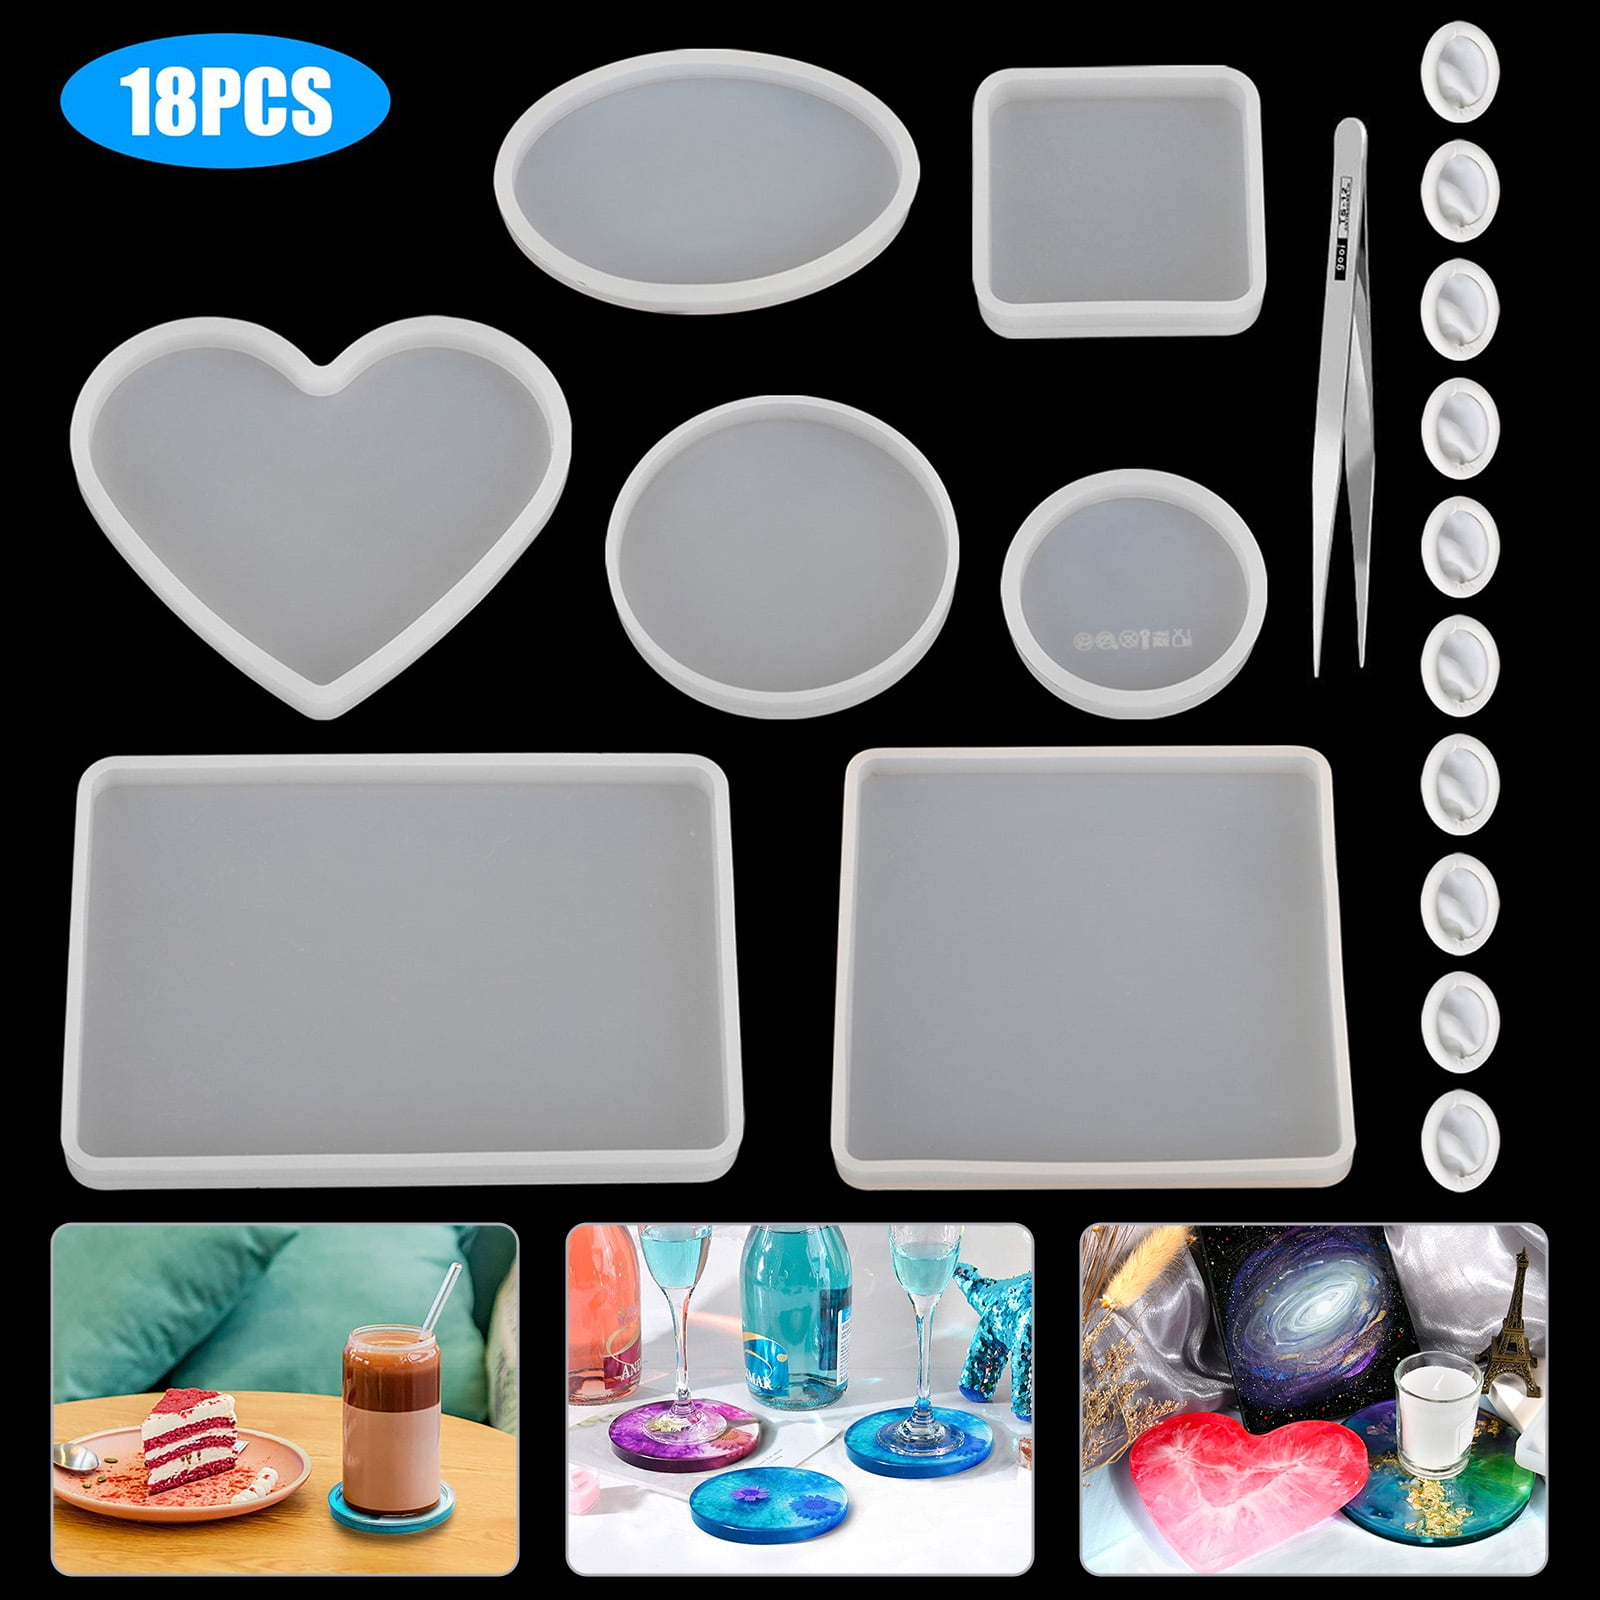 4 Pcs Heart Shape Epoxy Molds Large Resin Mold Silicone Resin Coaster Molds  Include 7 Inch, 6 Inch, 4 Inch, 2 Inch Resin Heart Casting Mold